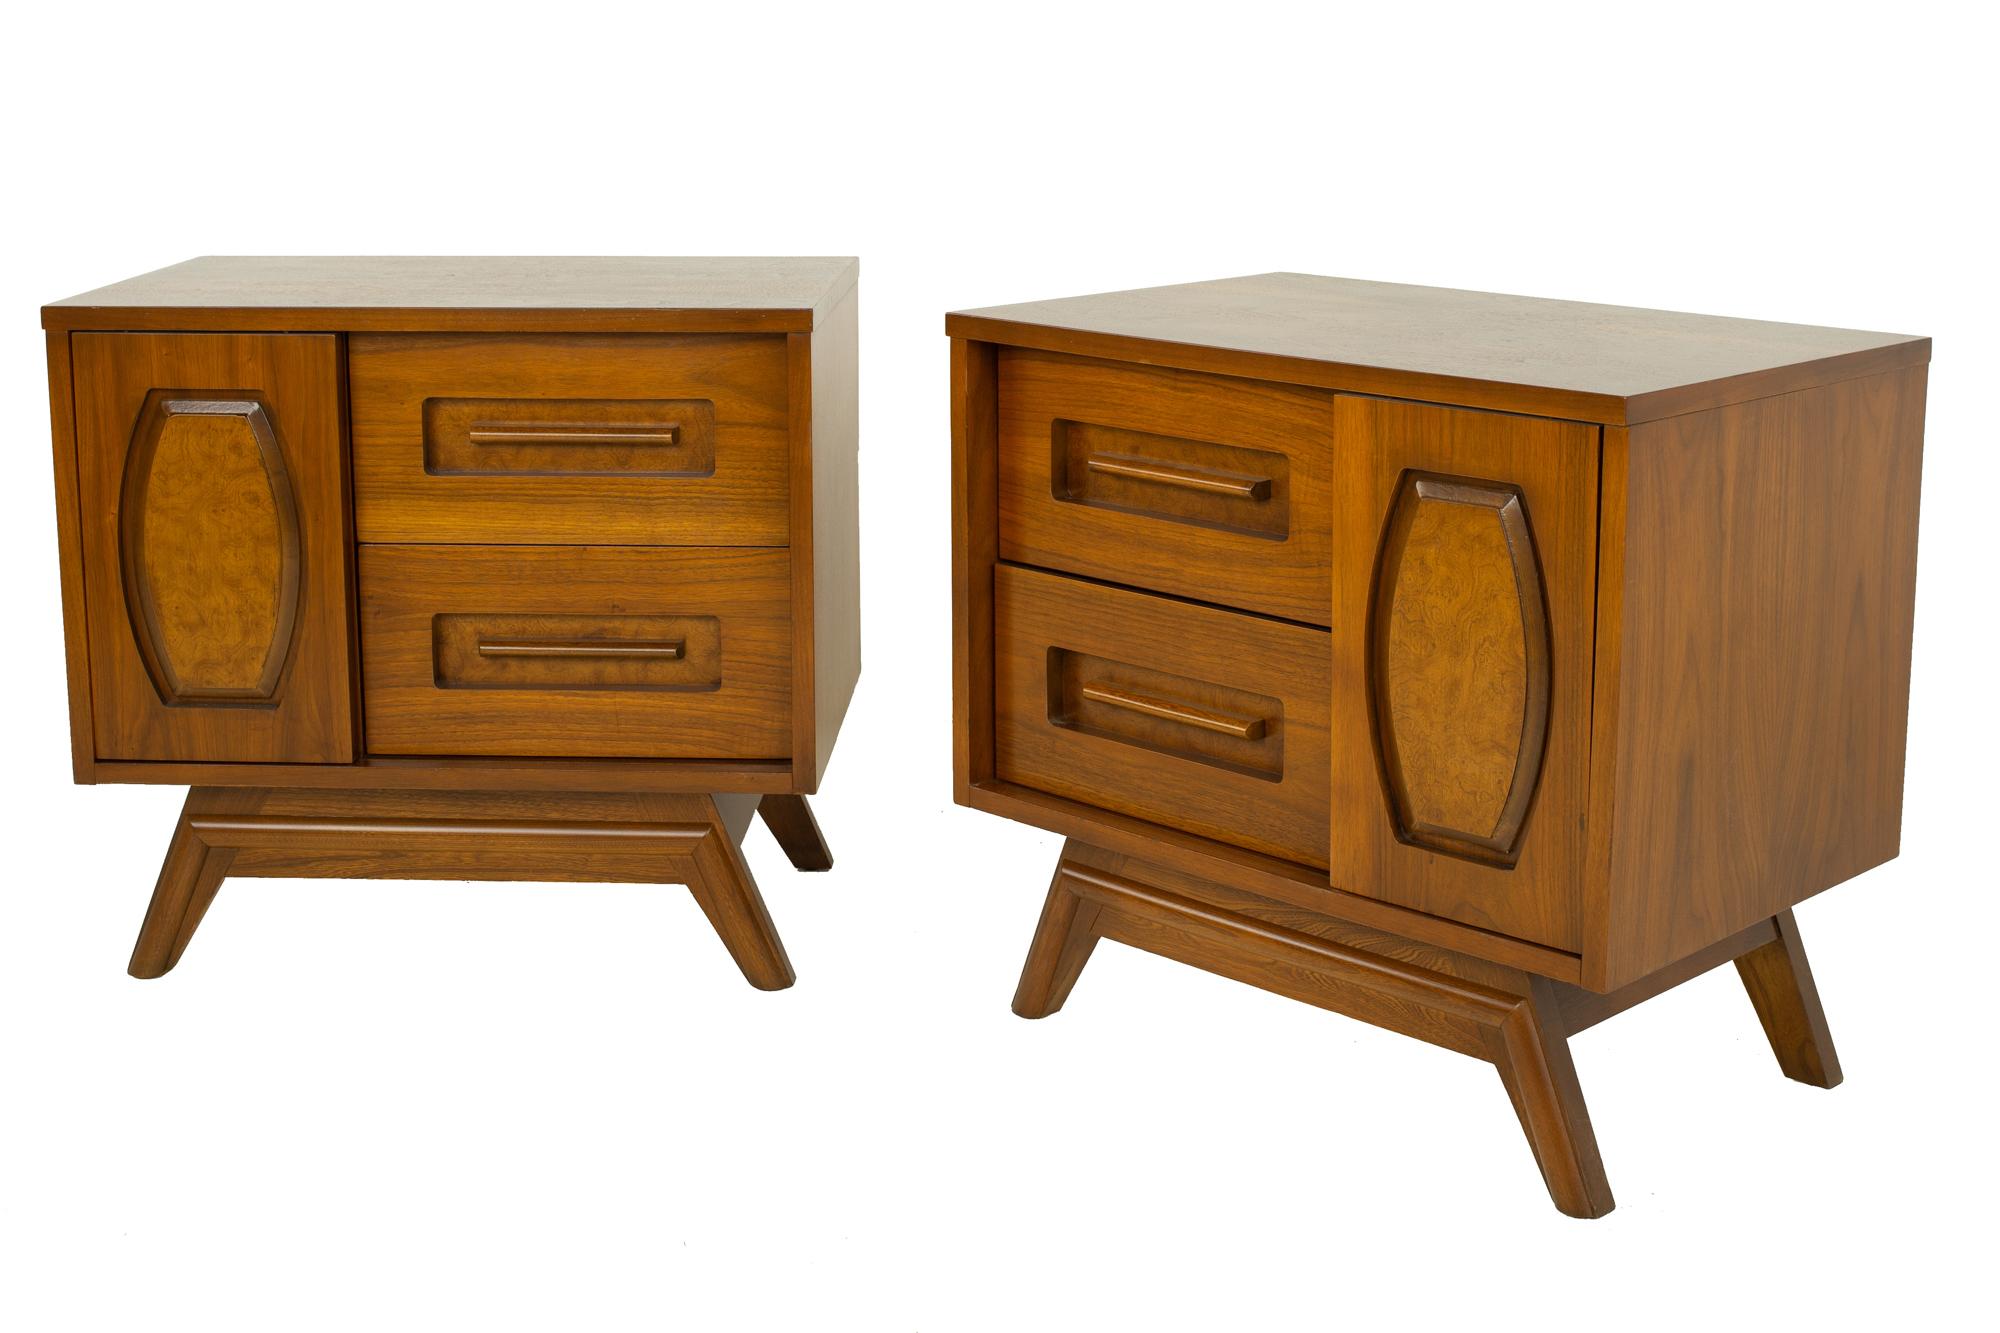 Young Manufacturing mid century walnut and burlwood nightstands - a pair

Each nightstand measures: 26 wide x 17 deep x 24.25 inches high

All pieces of furniture can be had in what we call restored vintage condition. That means the piece is